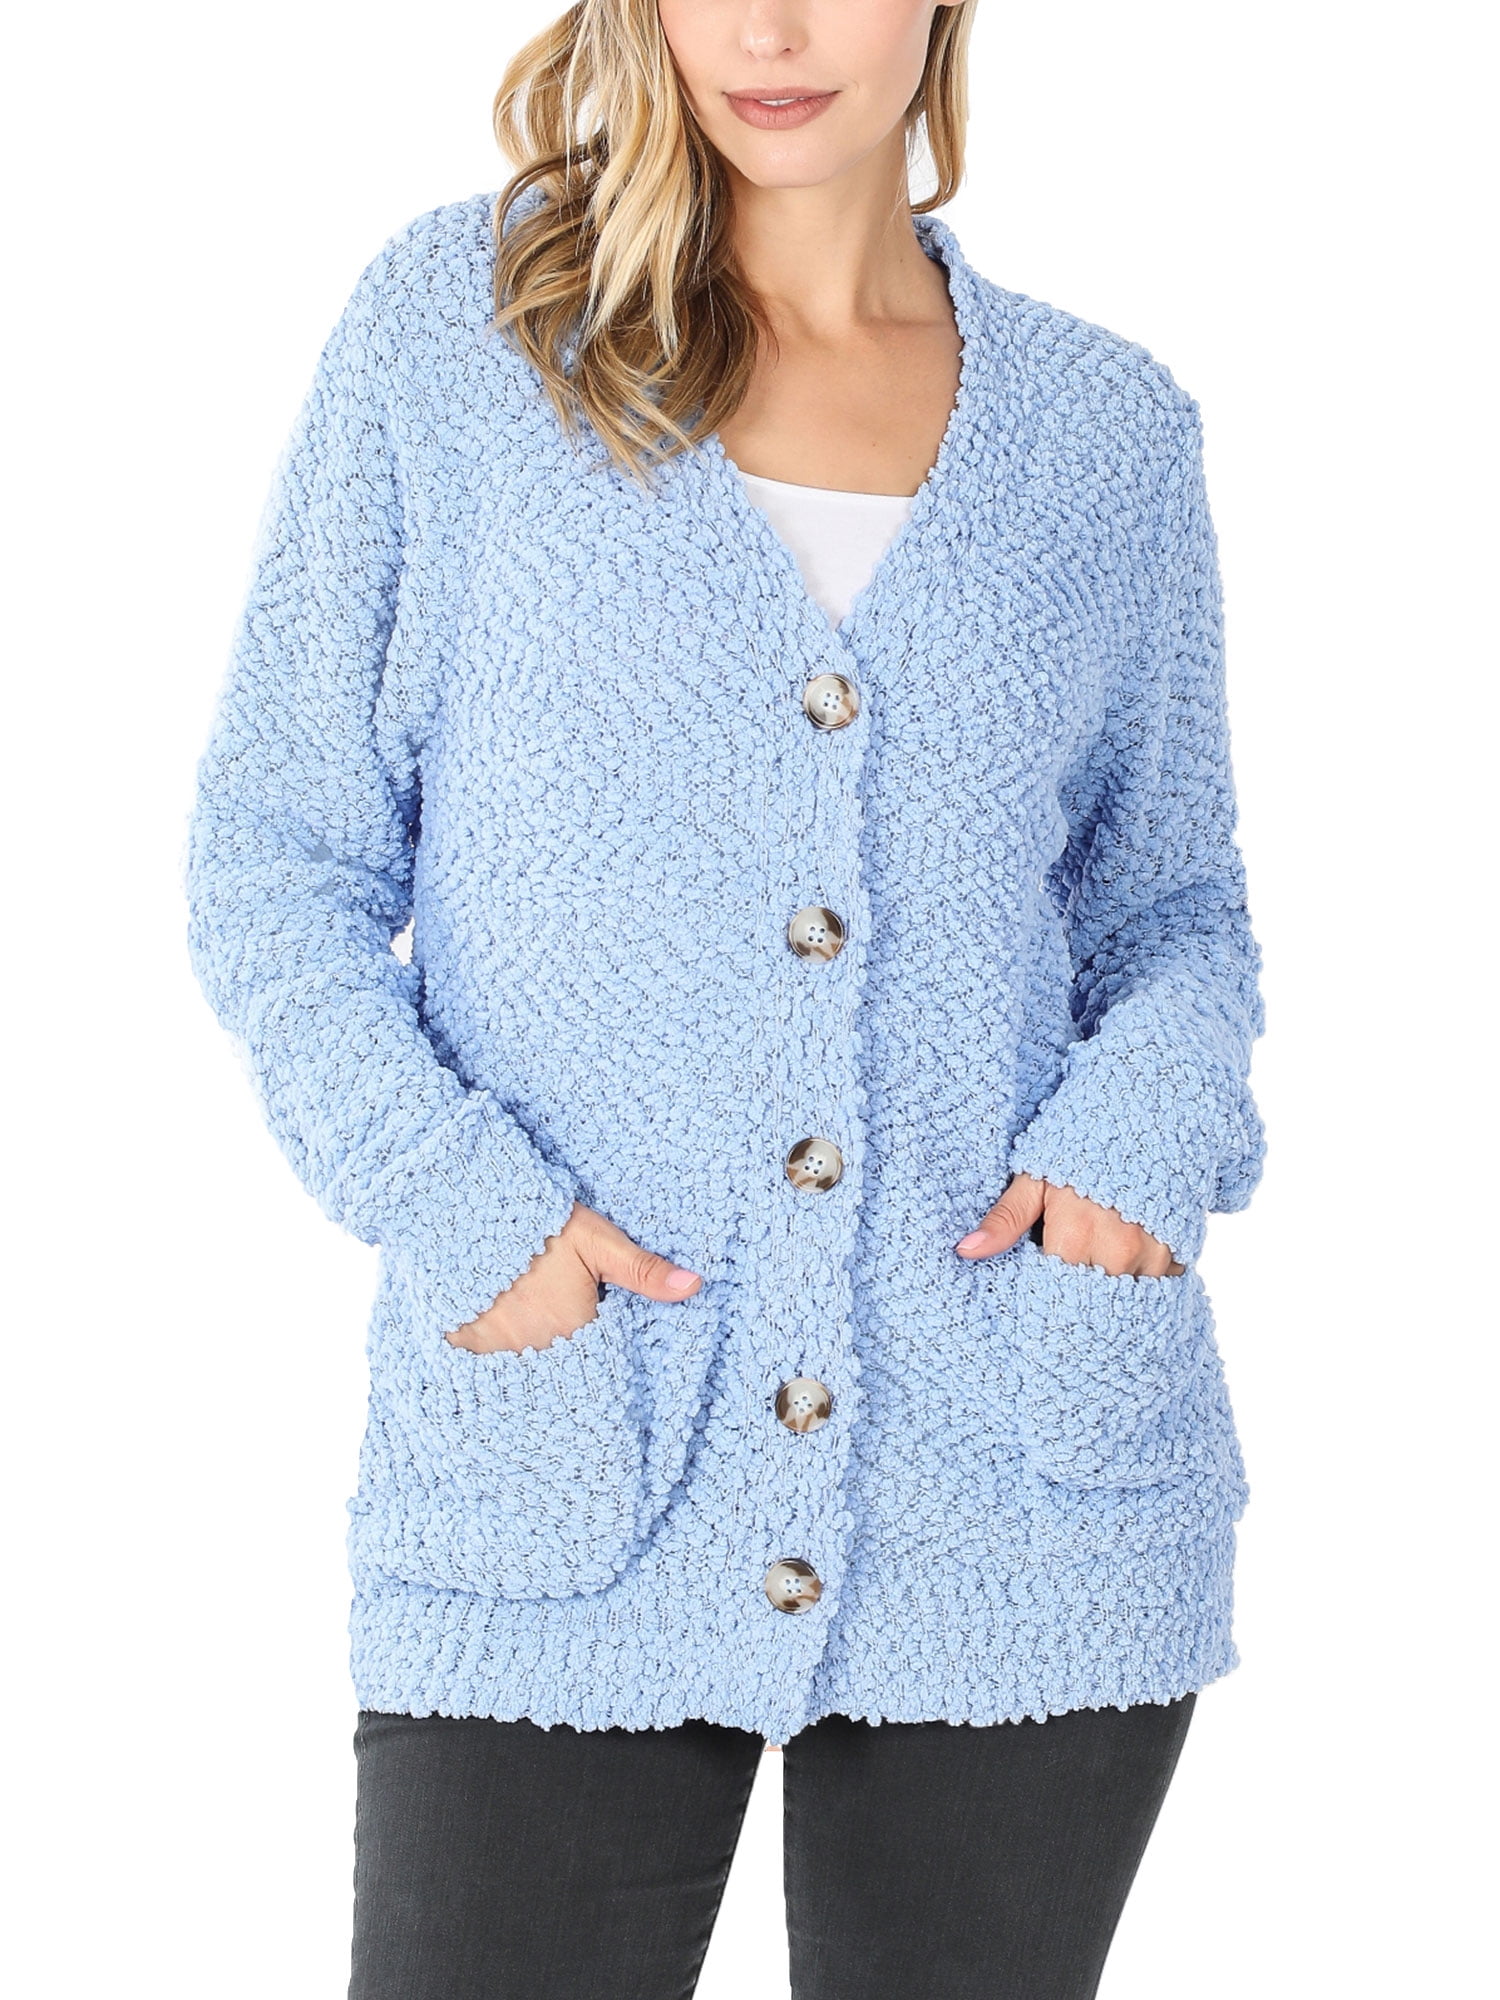 KOGMO Womens Popcorn Sweater Cardigans with Buttons and Pockets ...